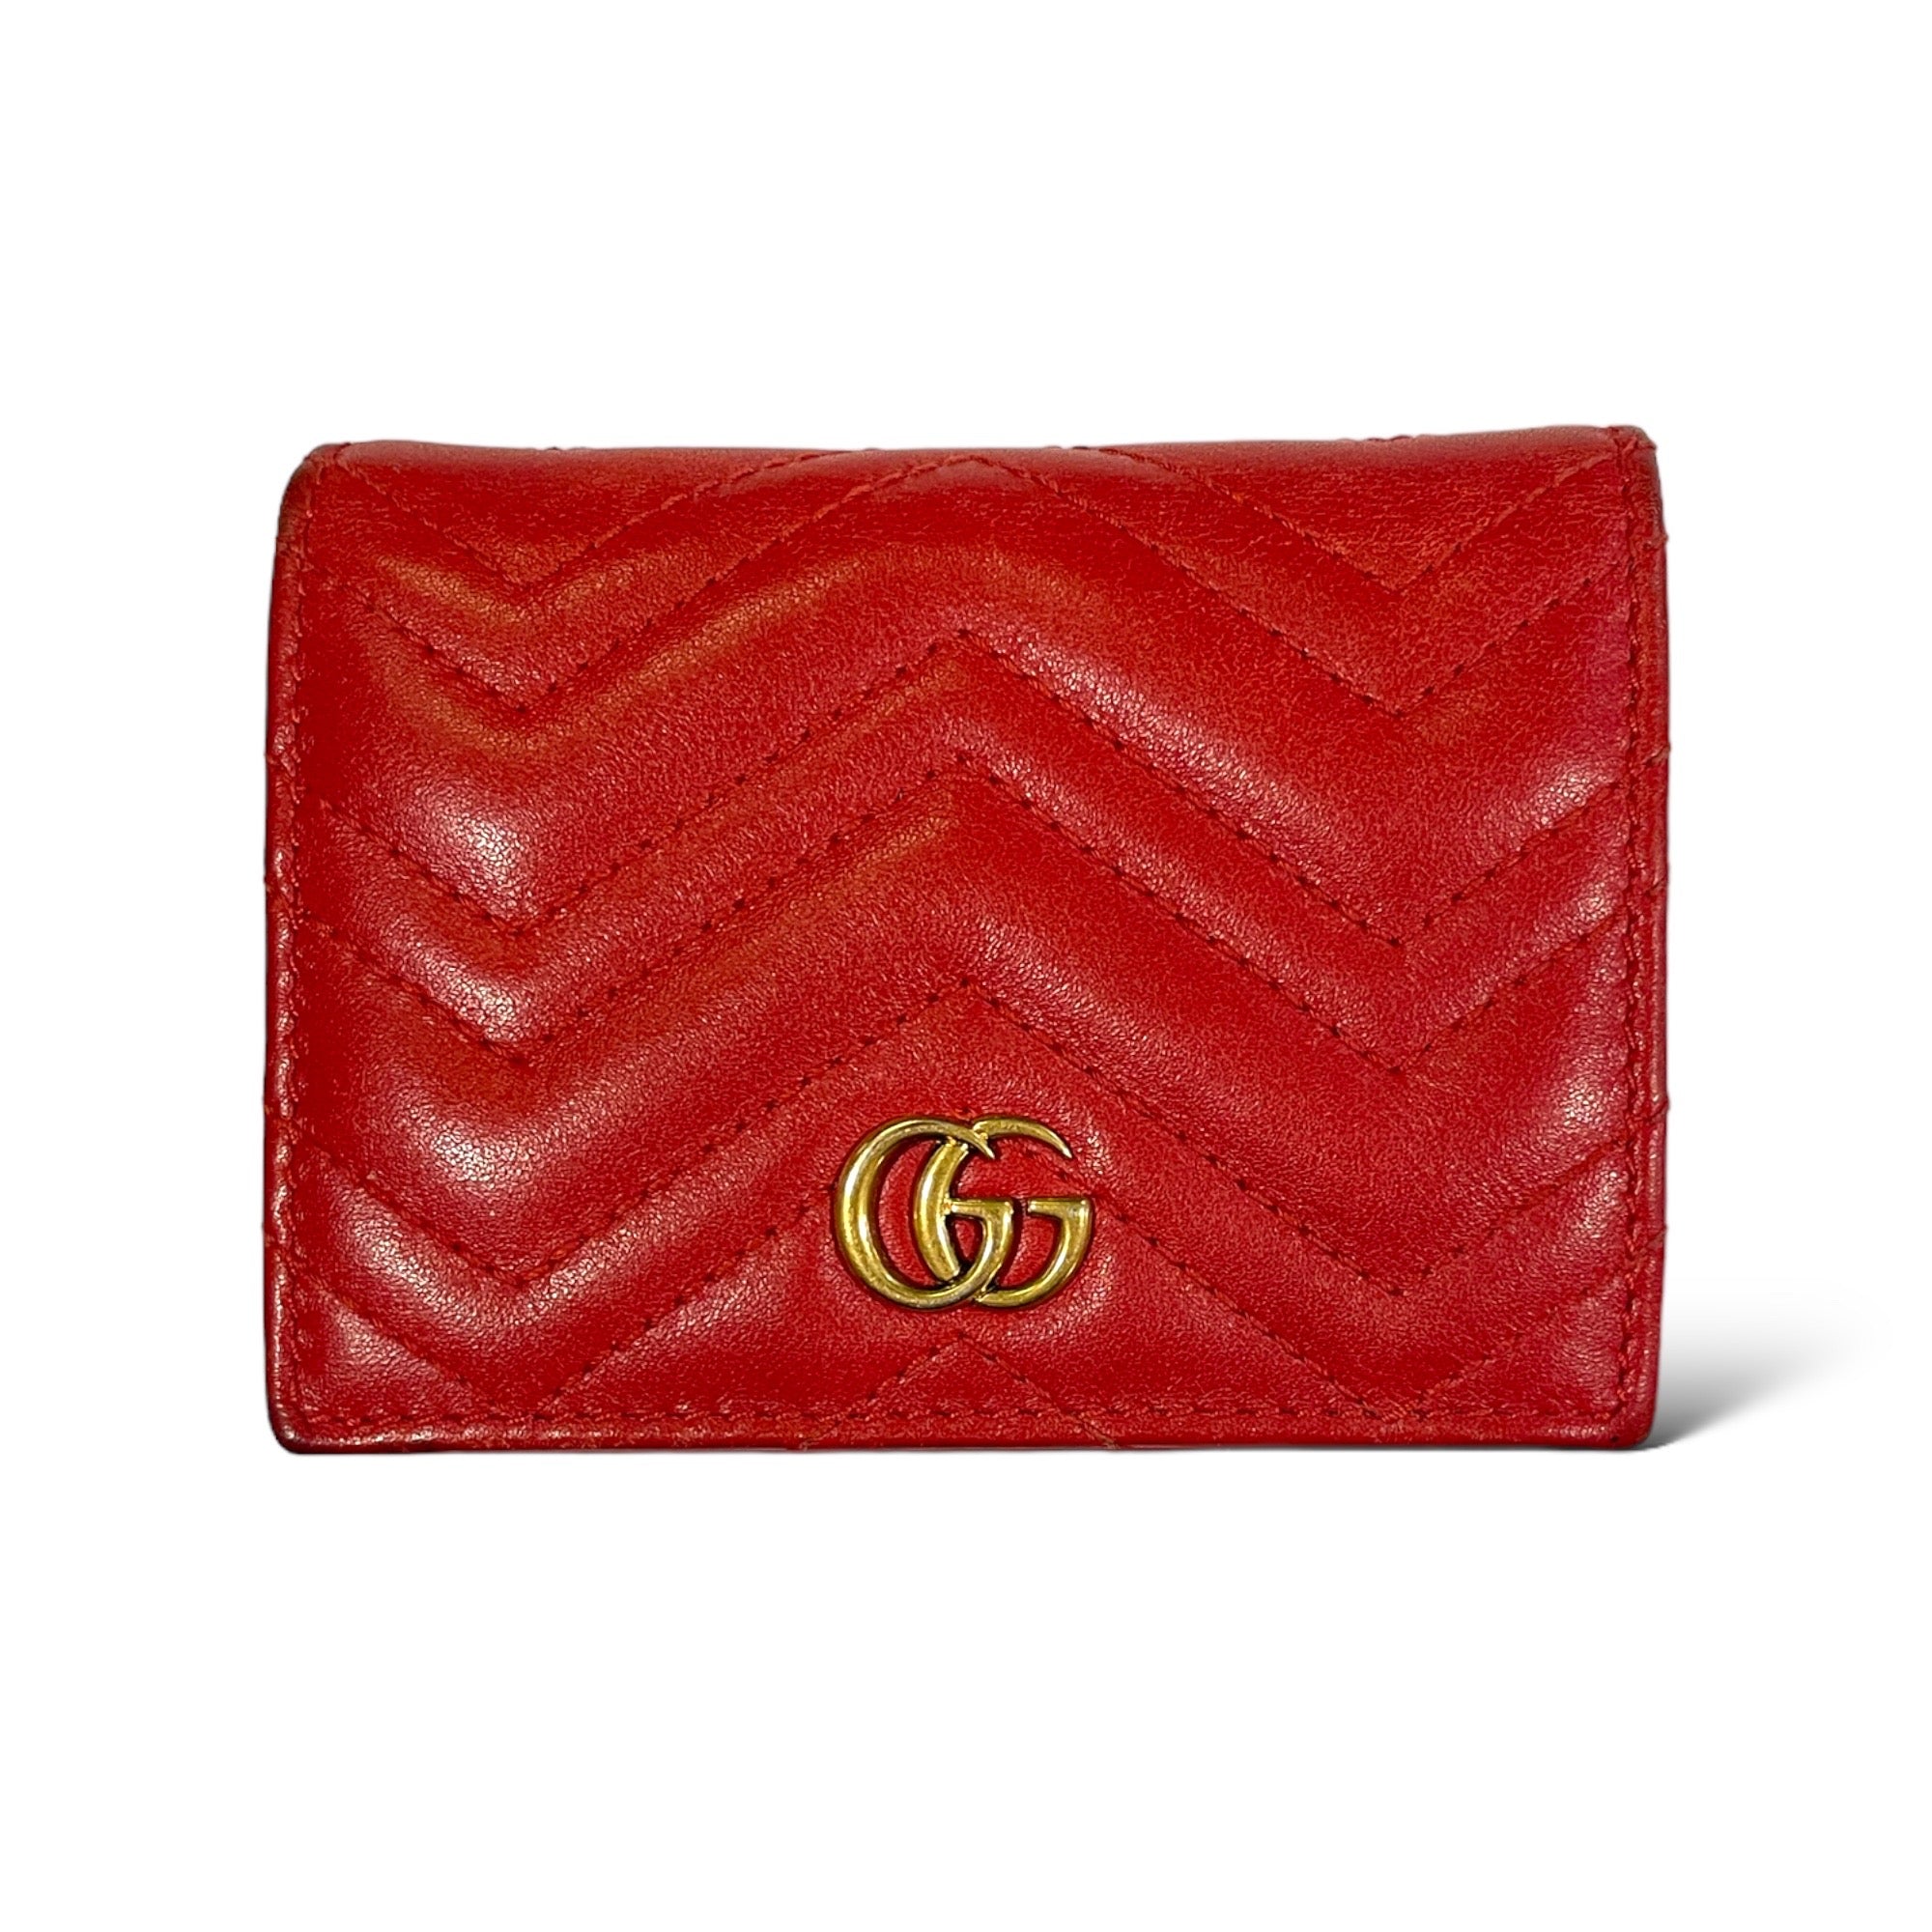 GUCCI GG MARMONT RED MATELASSÉ LEATHER CARD CASE WALLET